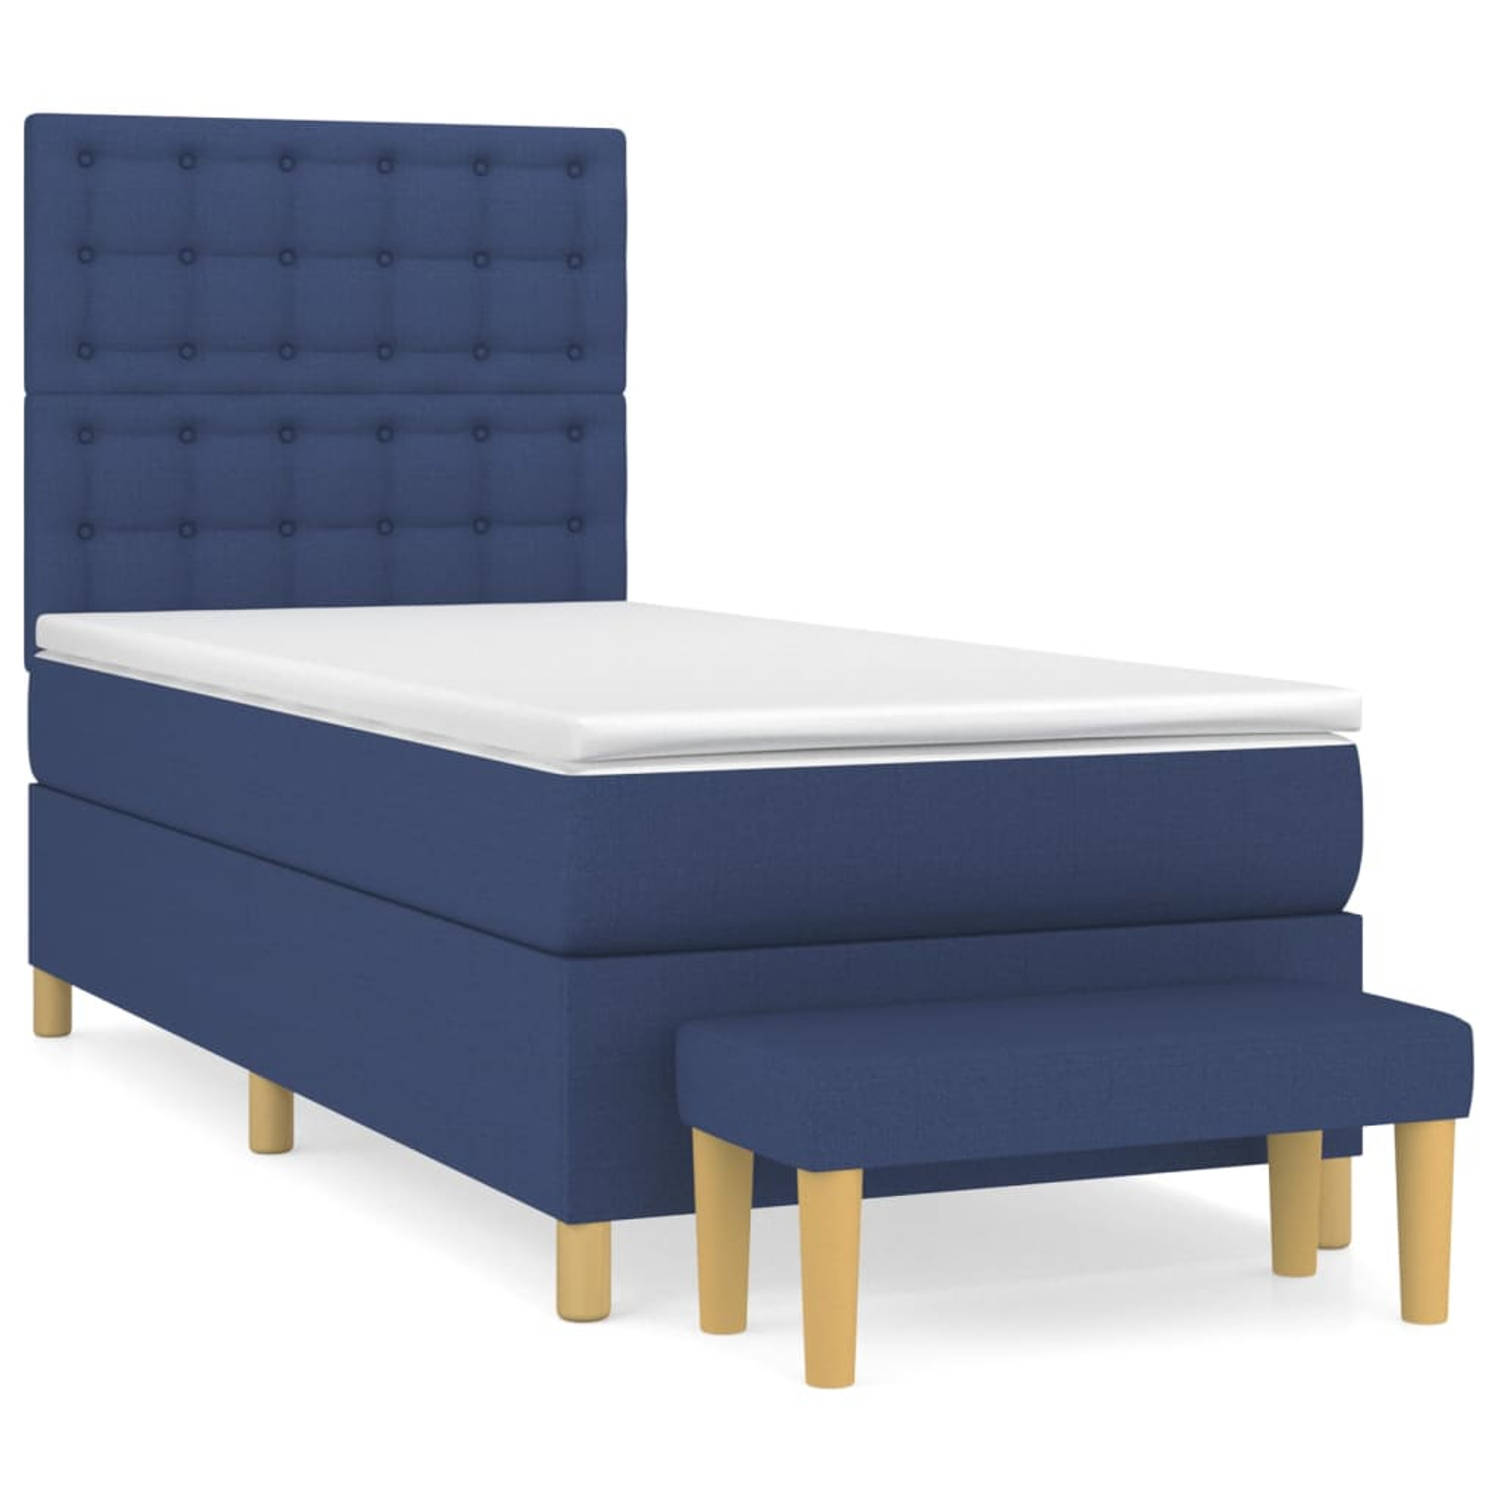 The Living Store Boxspring met matras stof blauw 90x190 cm - Boxspring - Boxsprings - Pocketveringbed - Bed - Slaapmeubel - Boxspringbed - Boxspring Bed - Eenpersoonsbed - Bed Met